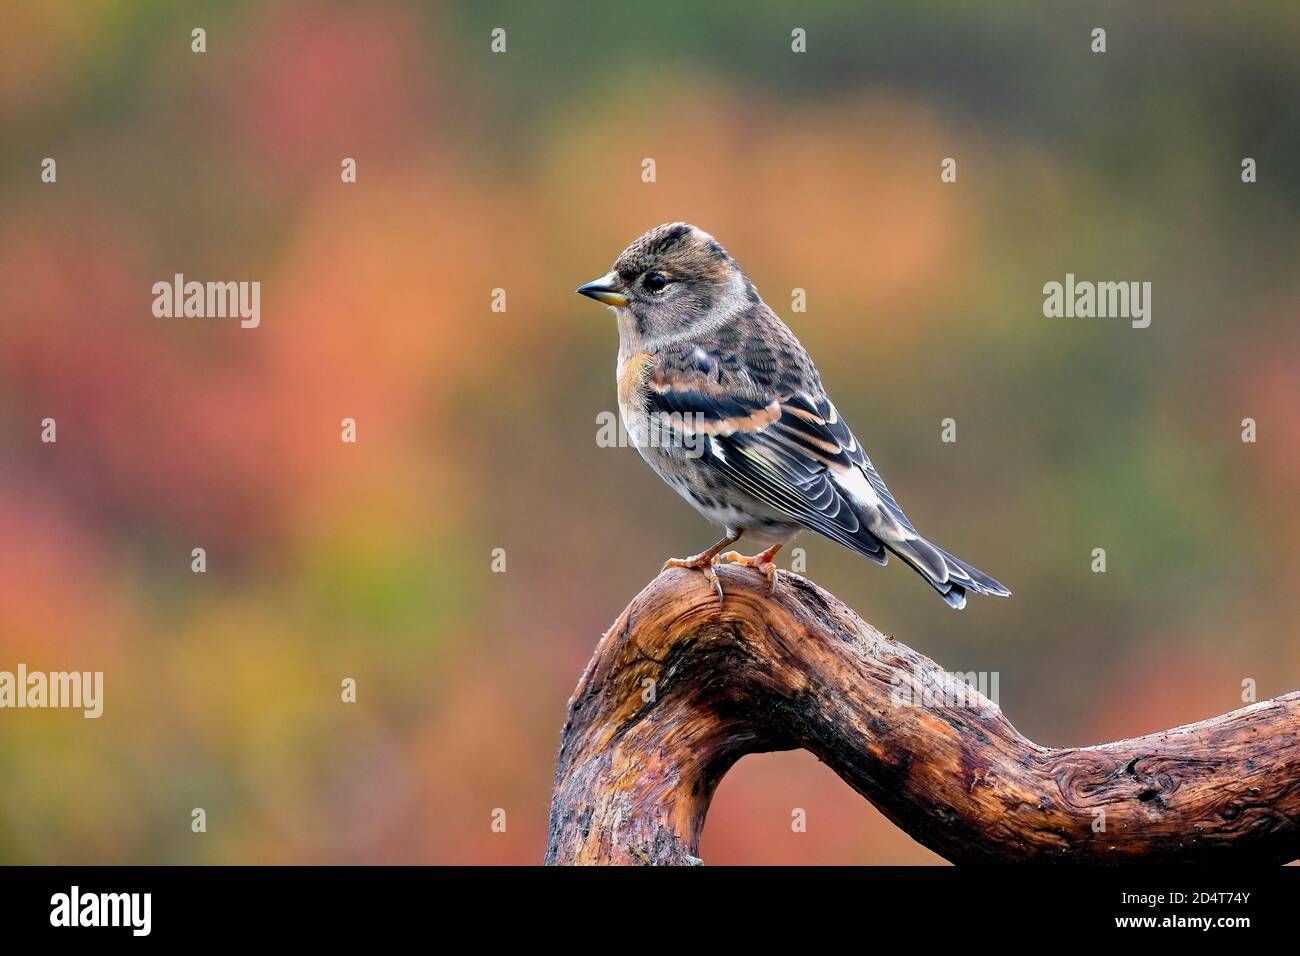 Brambling against colorful autumn background. Stock Photo